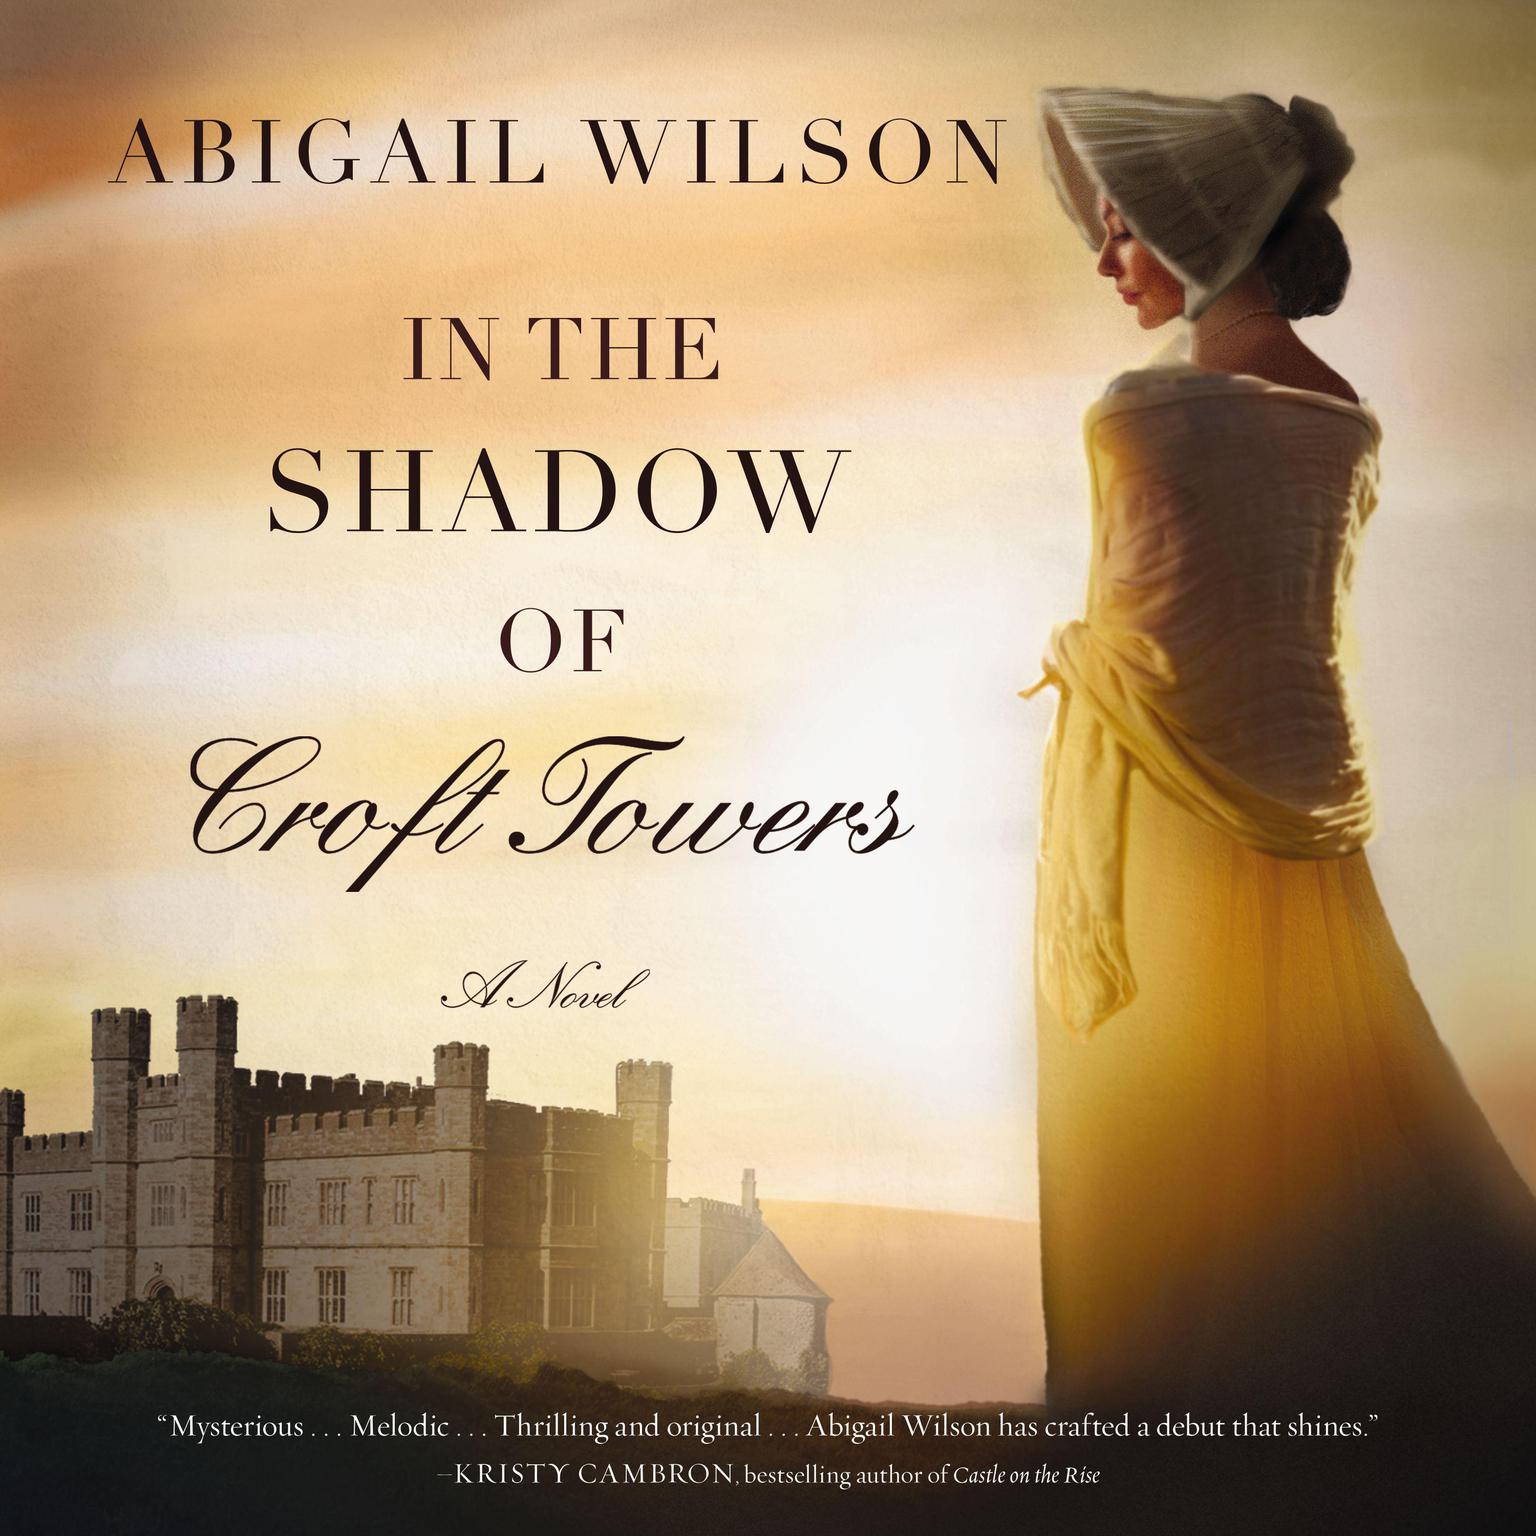 In the Shadow of Croft Towers: A Regency Romance Audiobook, by Abigail Wilson